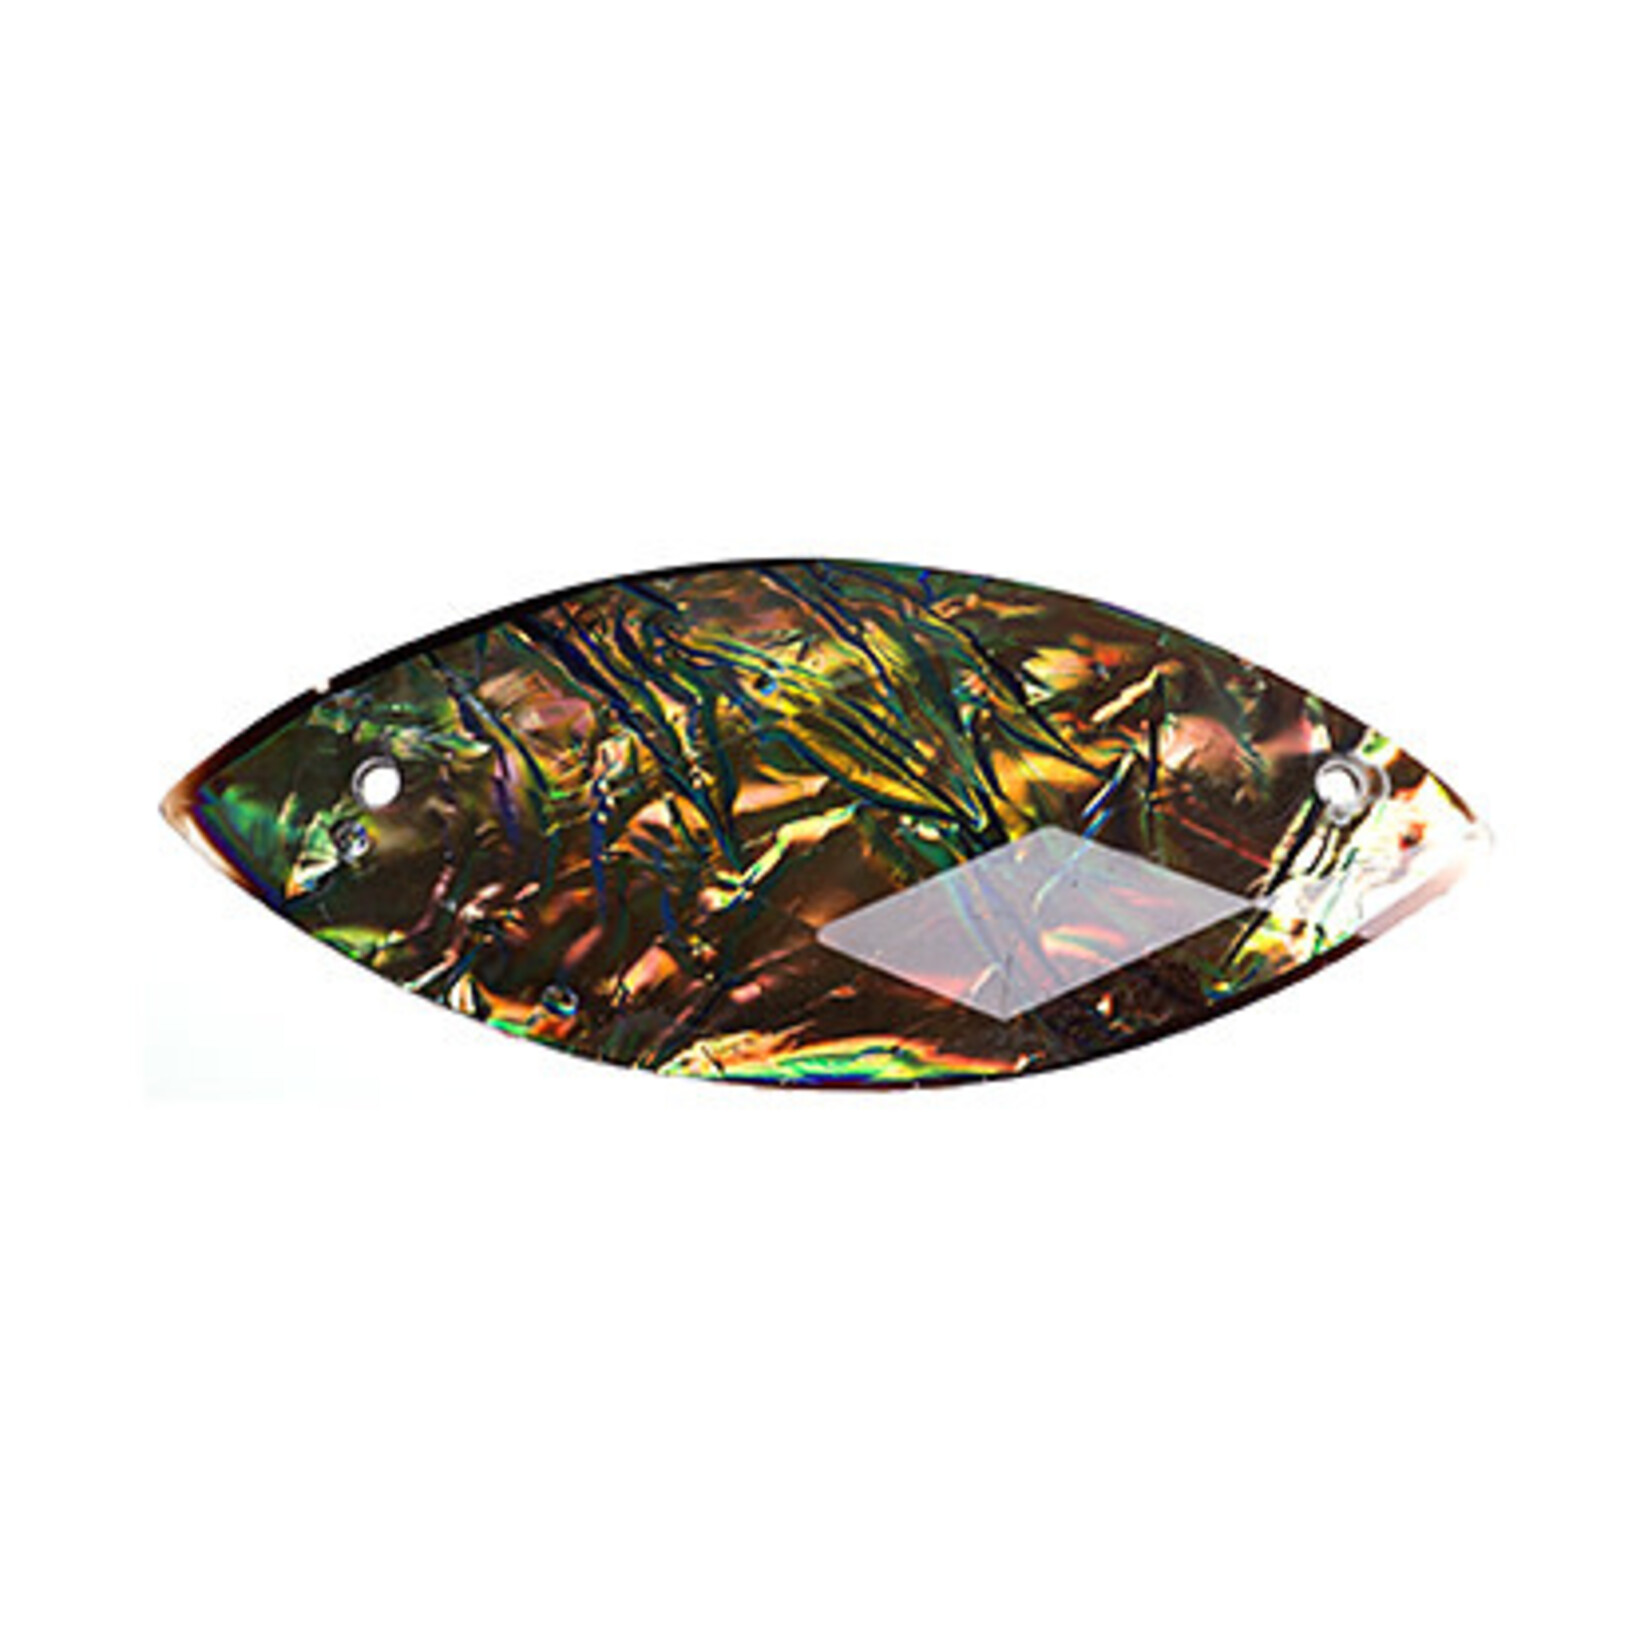 Dichroic Style Sew-On Stone 12 x 30 mm Navette (10 Pieces)